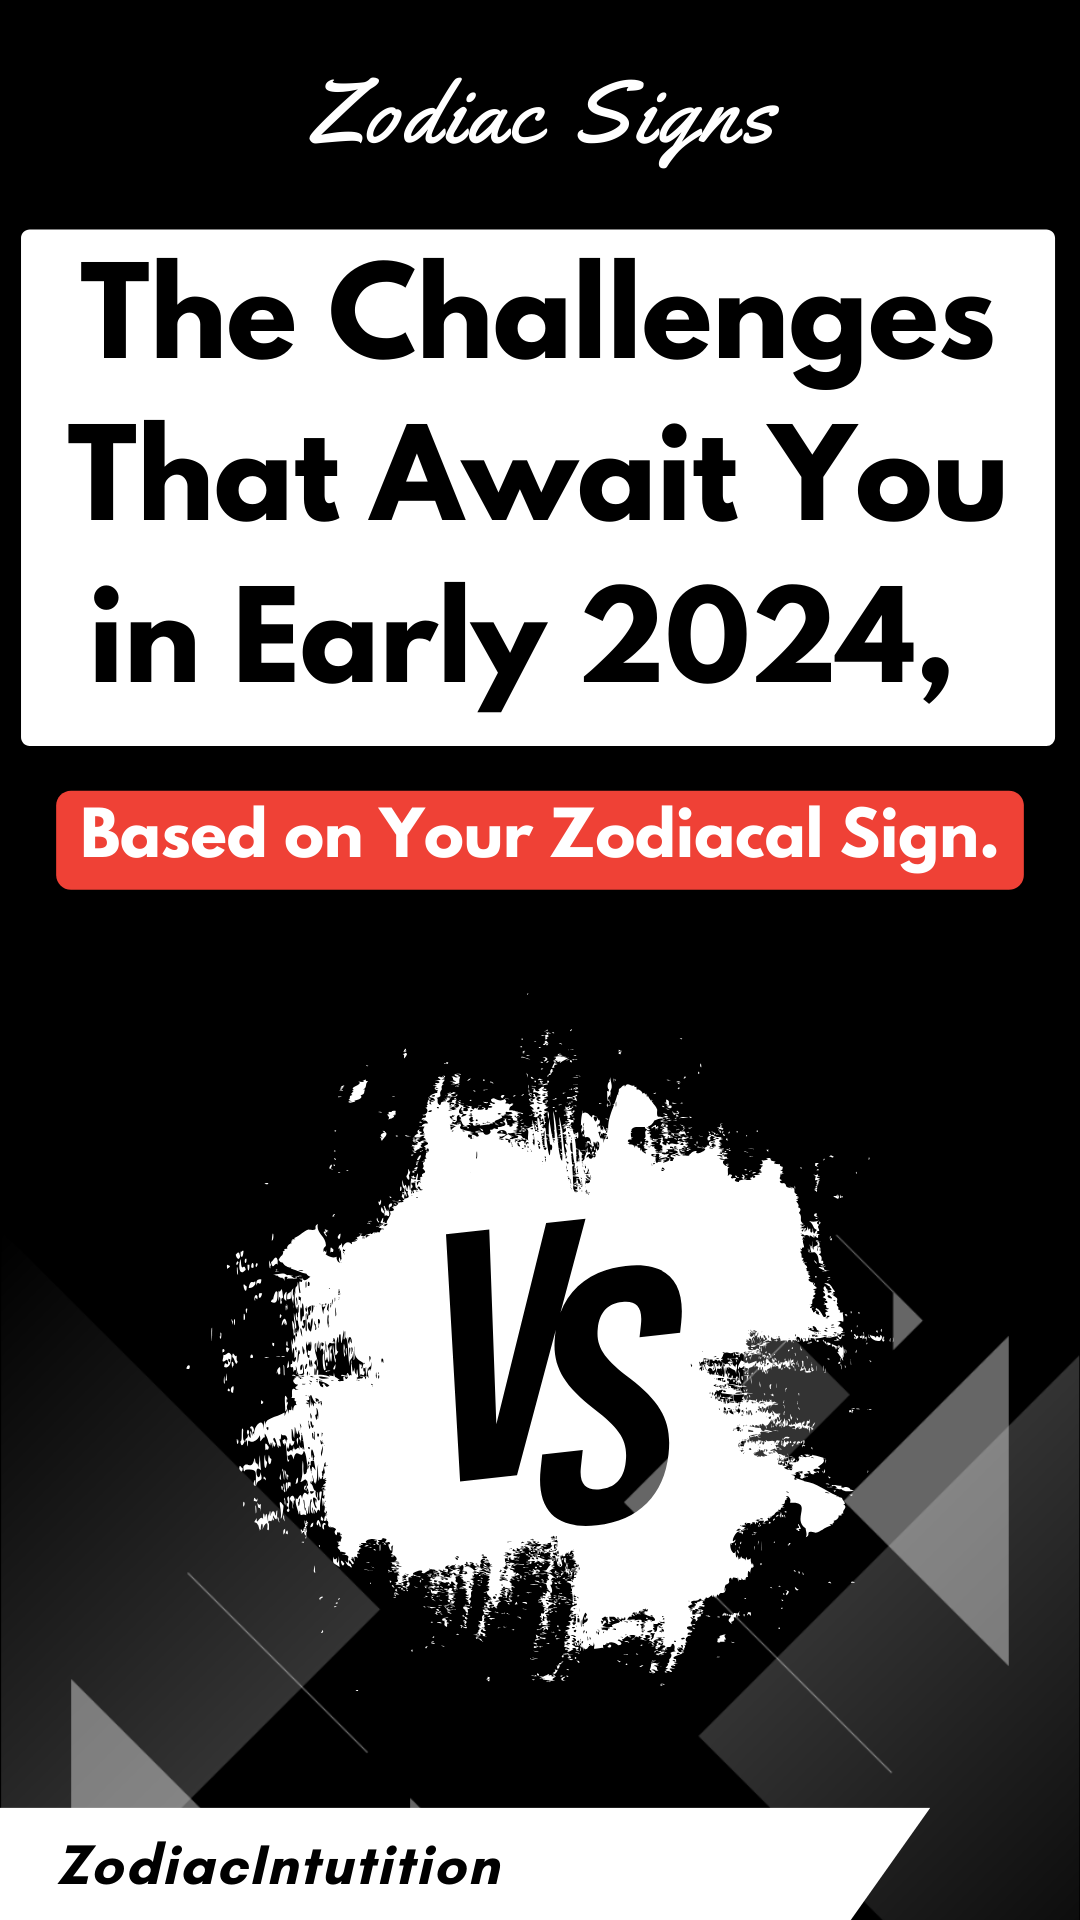 The Challenges That Await You in Early 2024, Based on Your Zodiacal Sign.